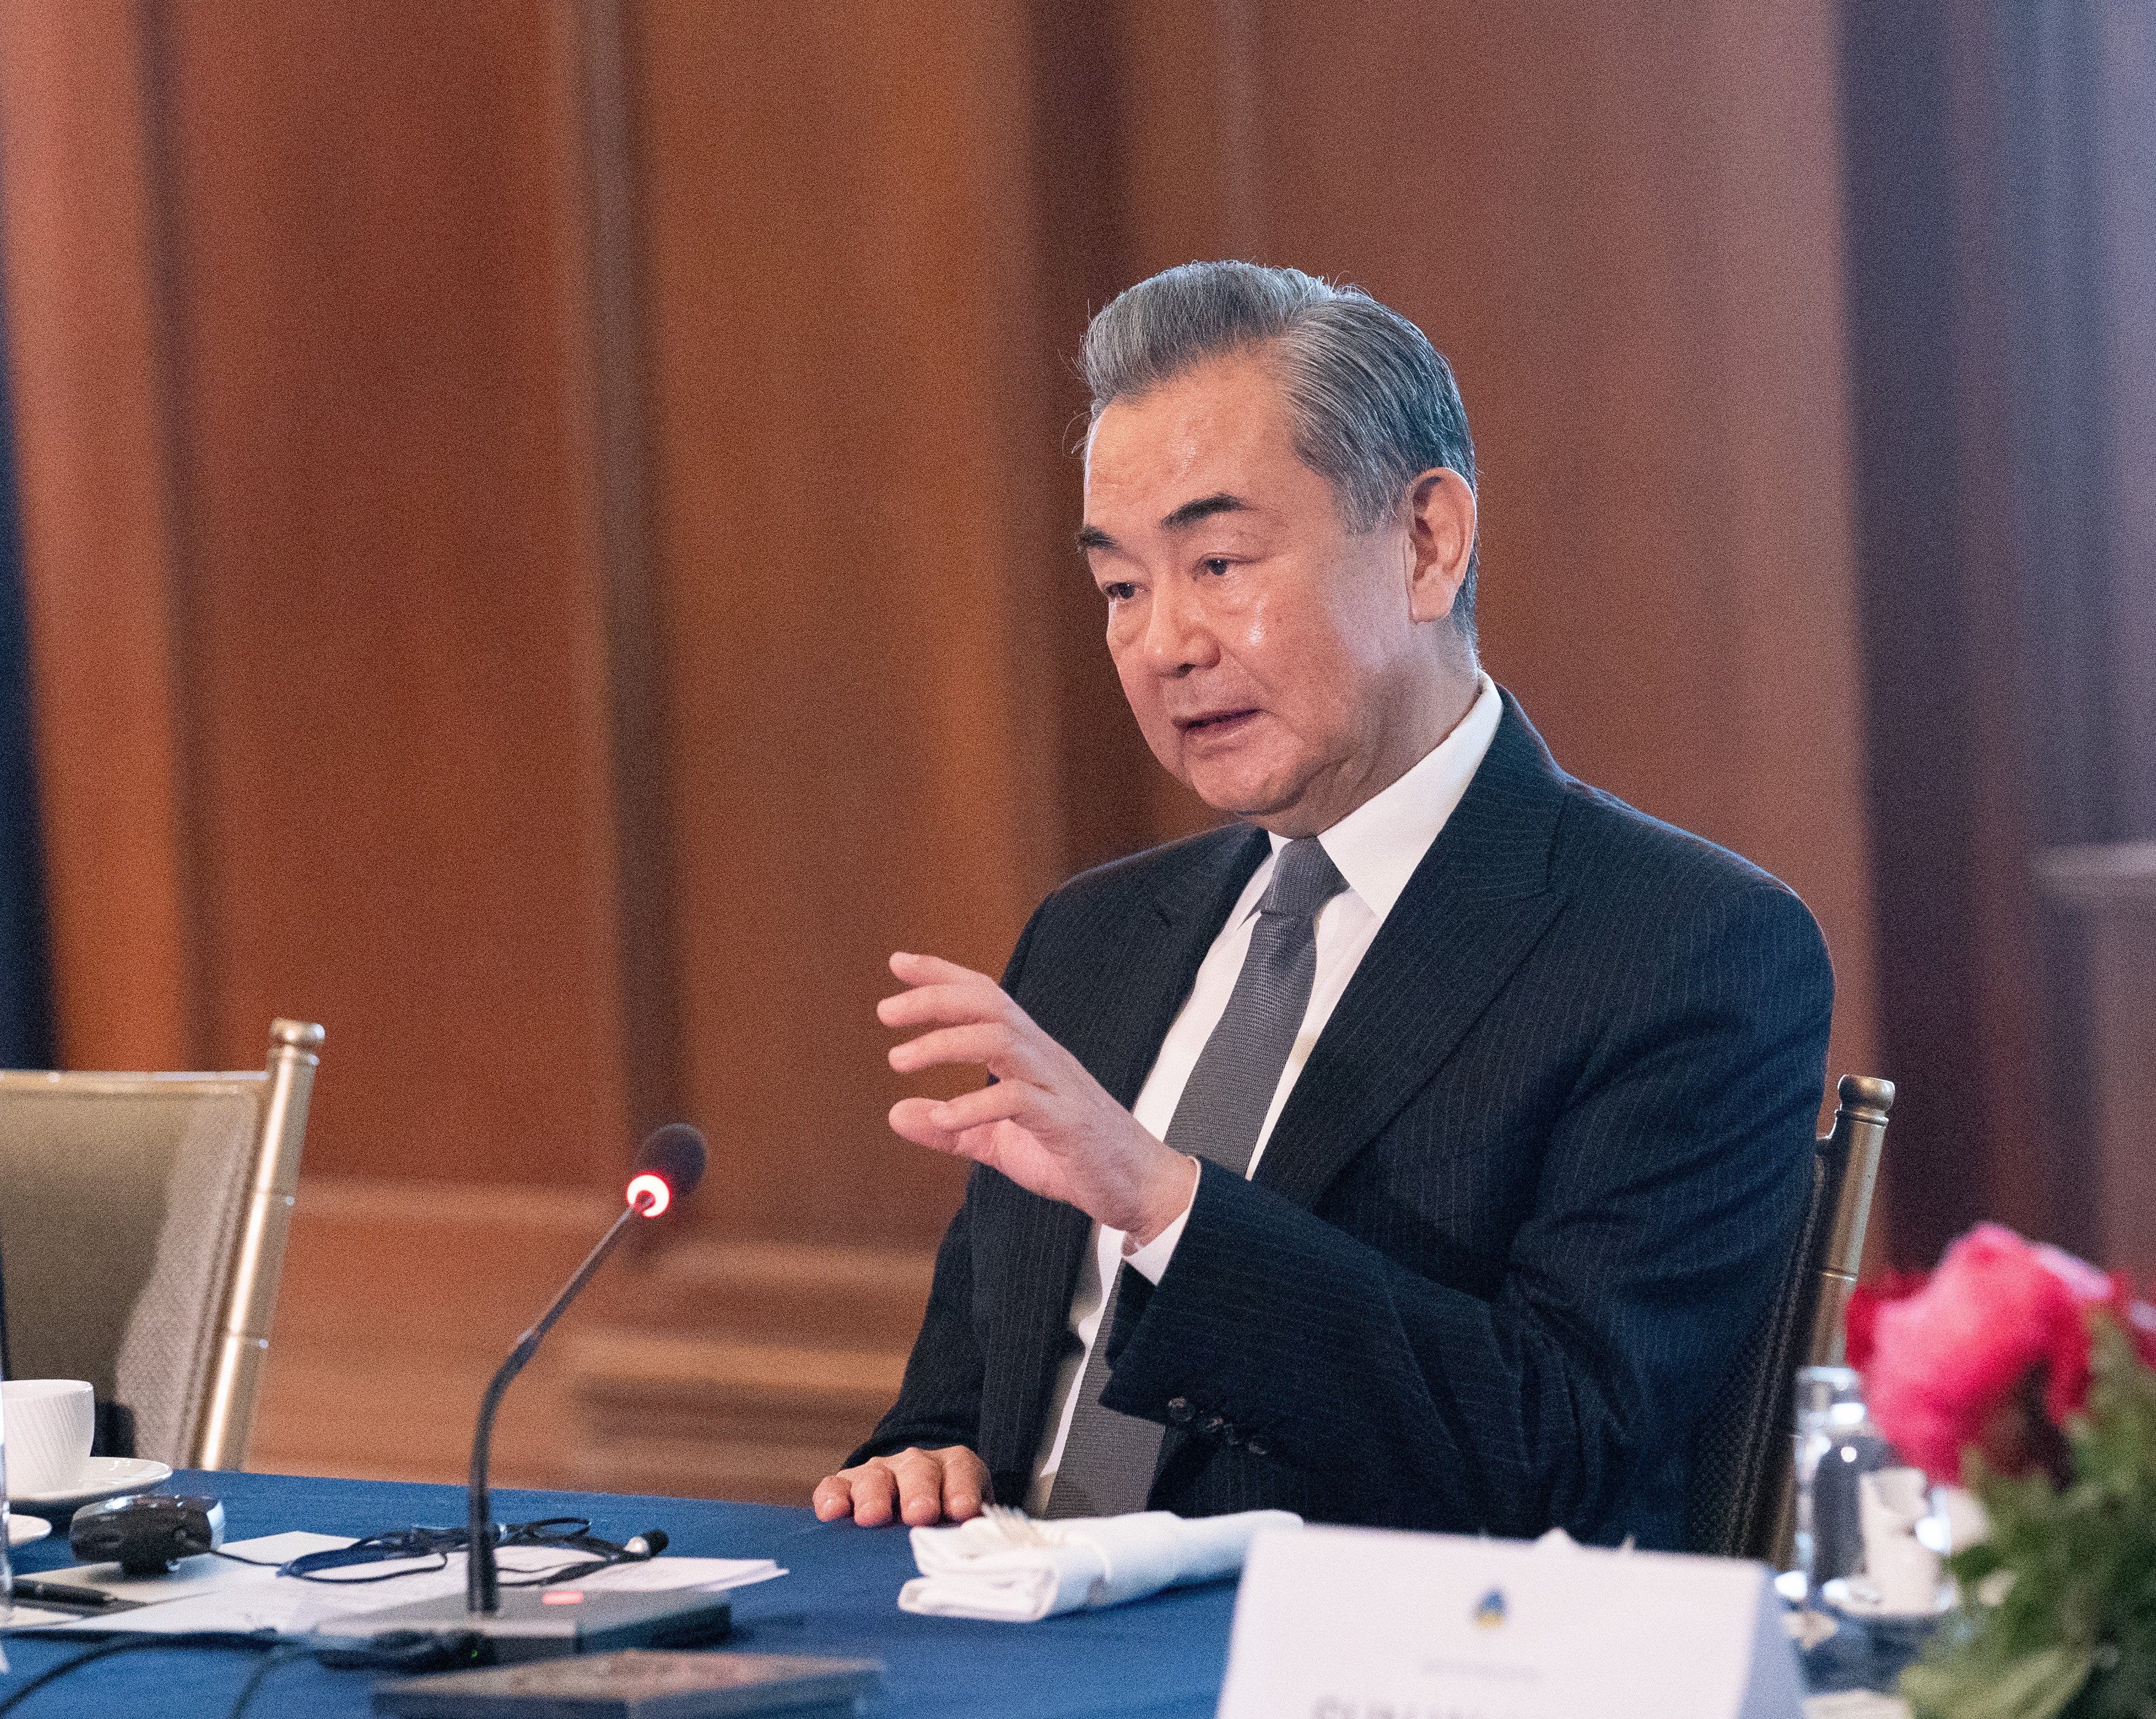 Chinese Foreign Minister Wang Yi and Takeo Akiba, Japan’s top national security advisor, discussed planning for high-level dialogue between their countries. Photo: Xinhua